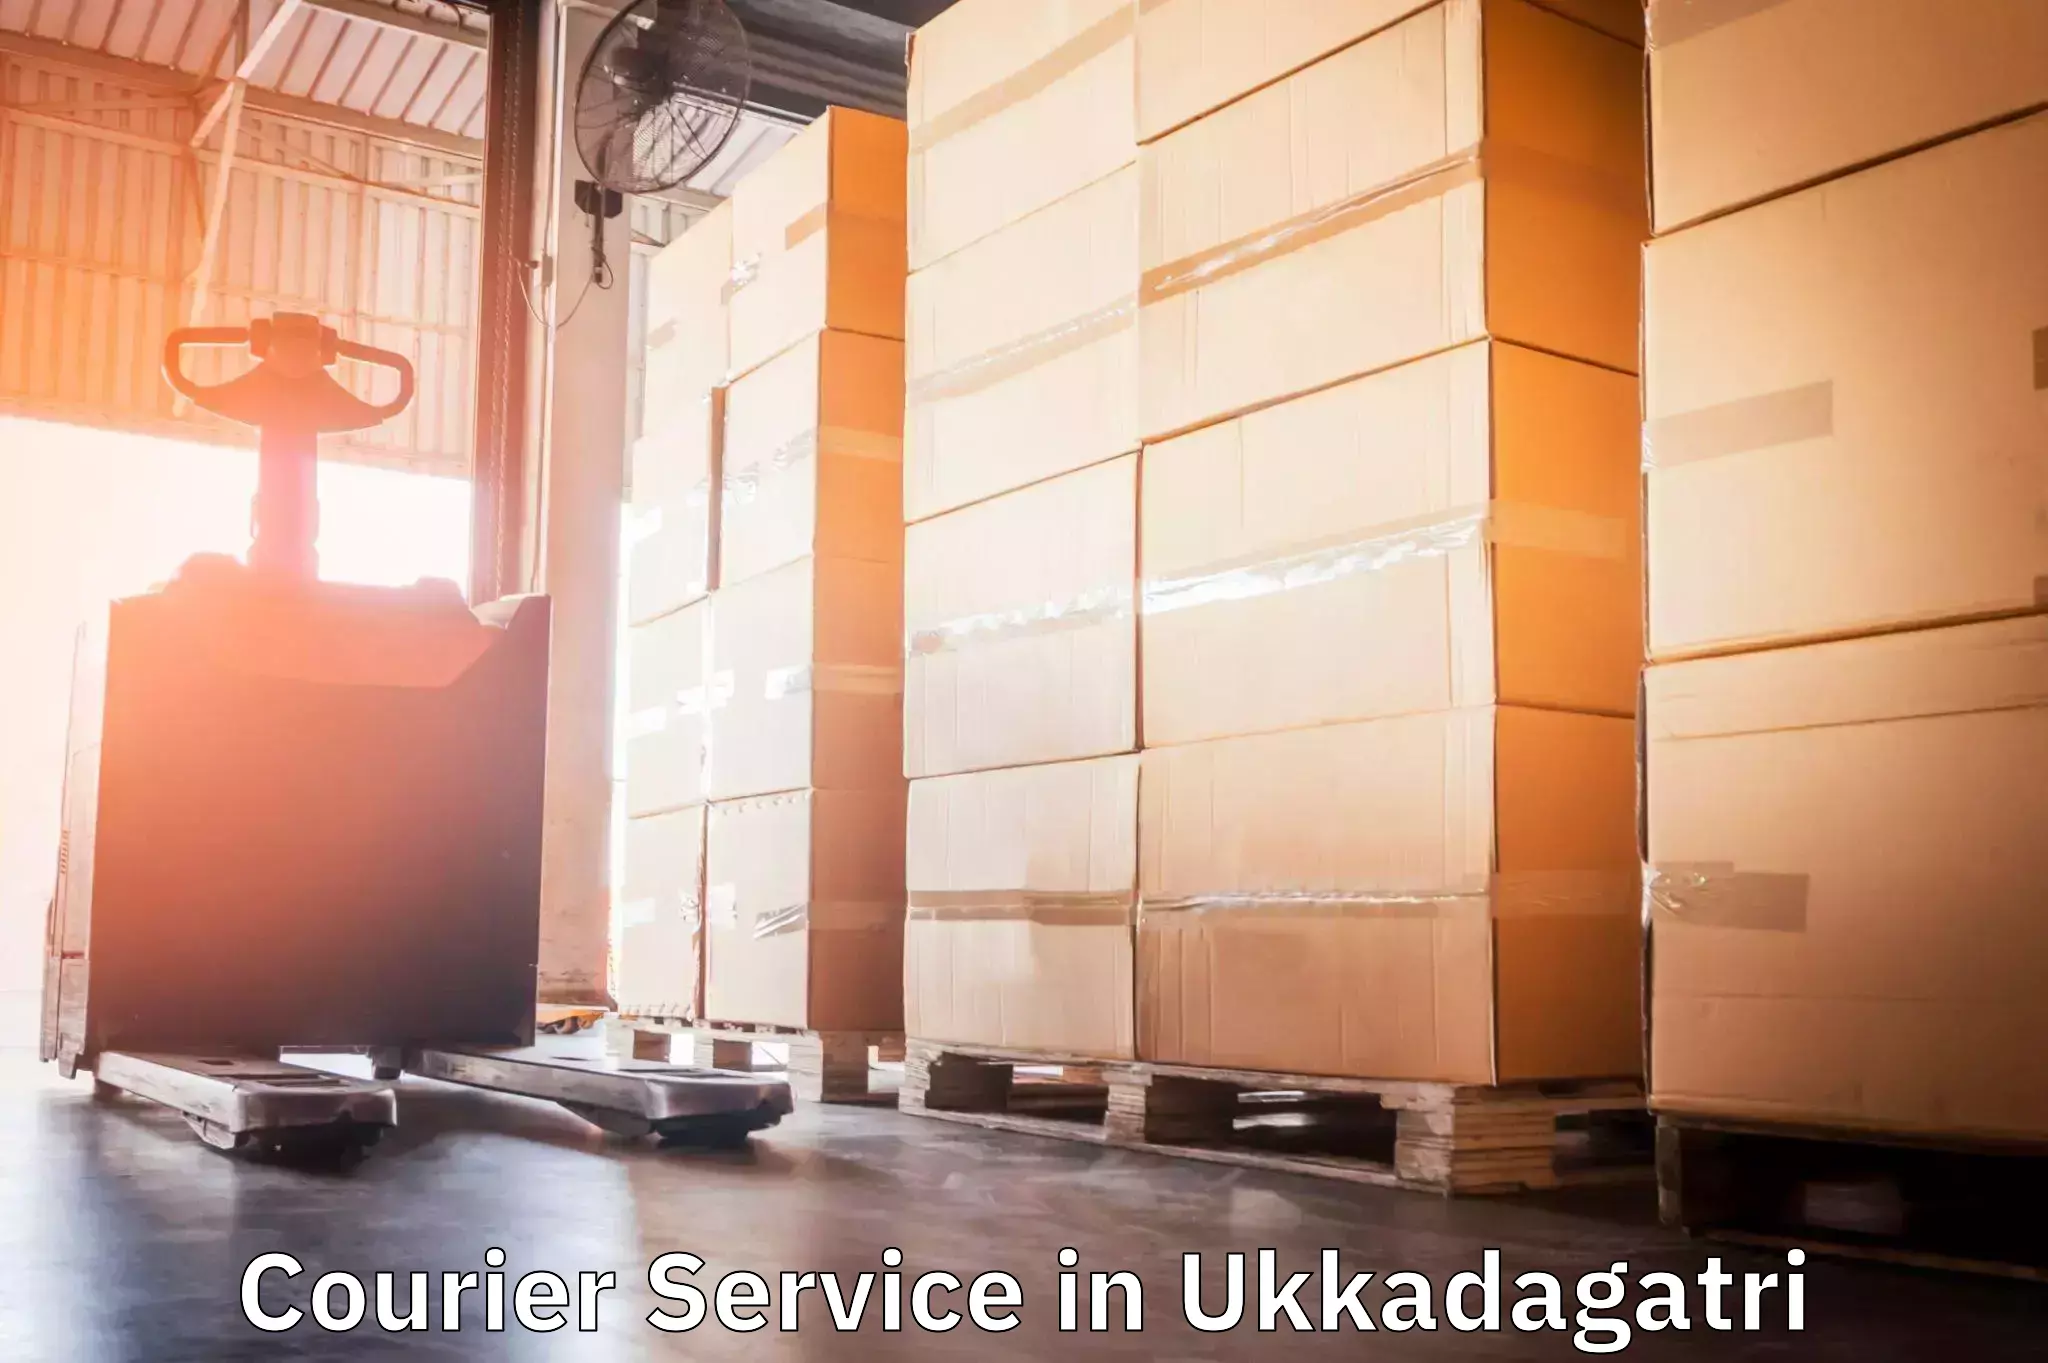 State-of-the-art courier technology in Ukkadagatri